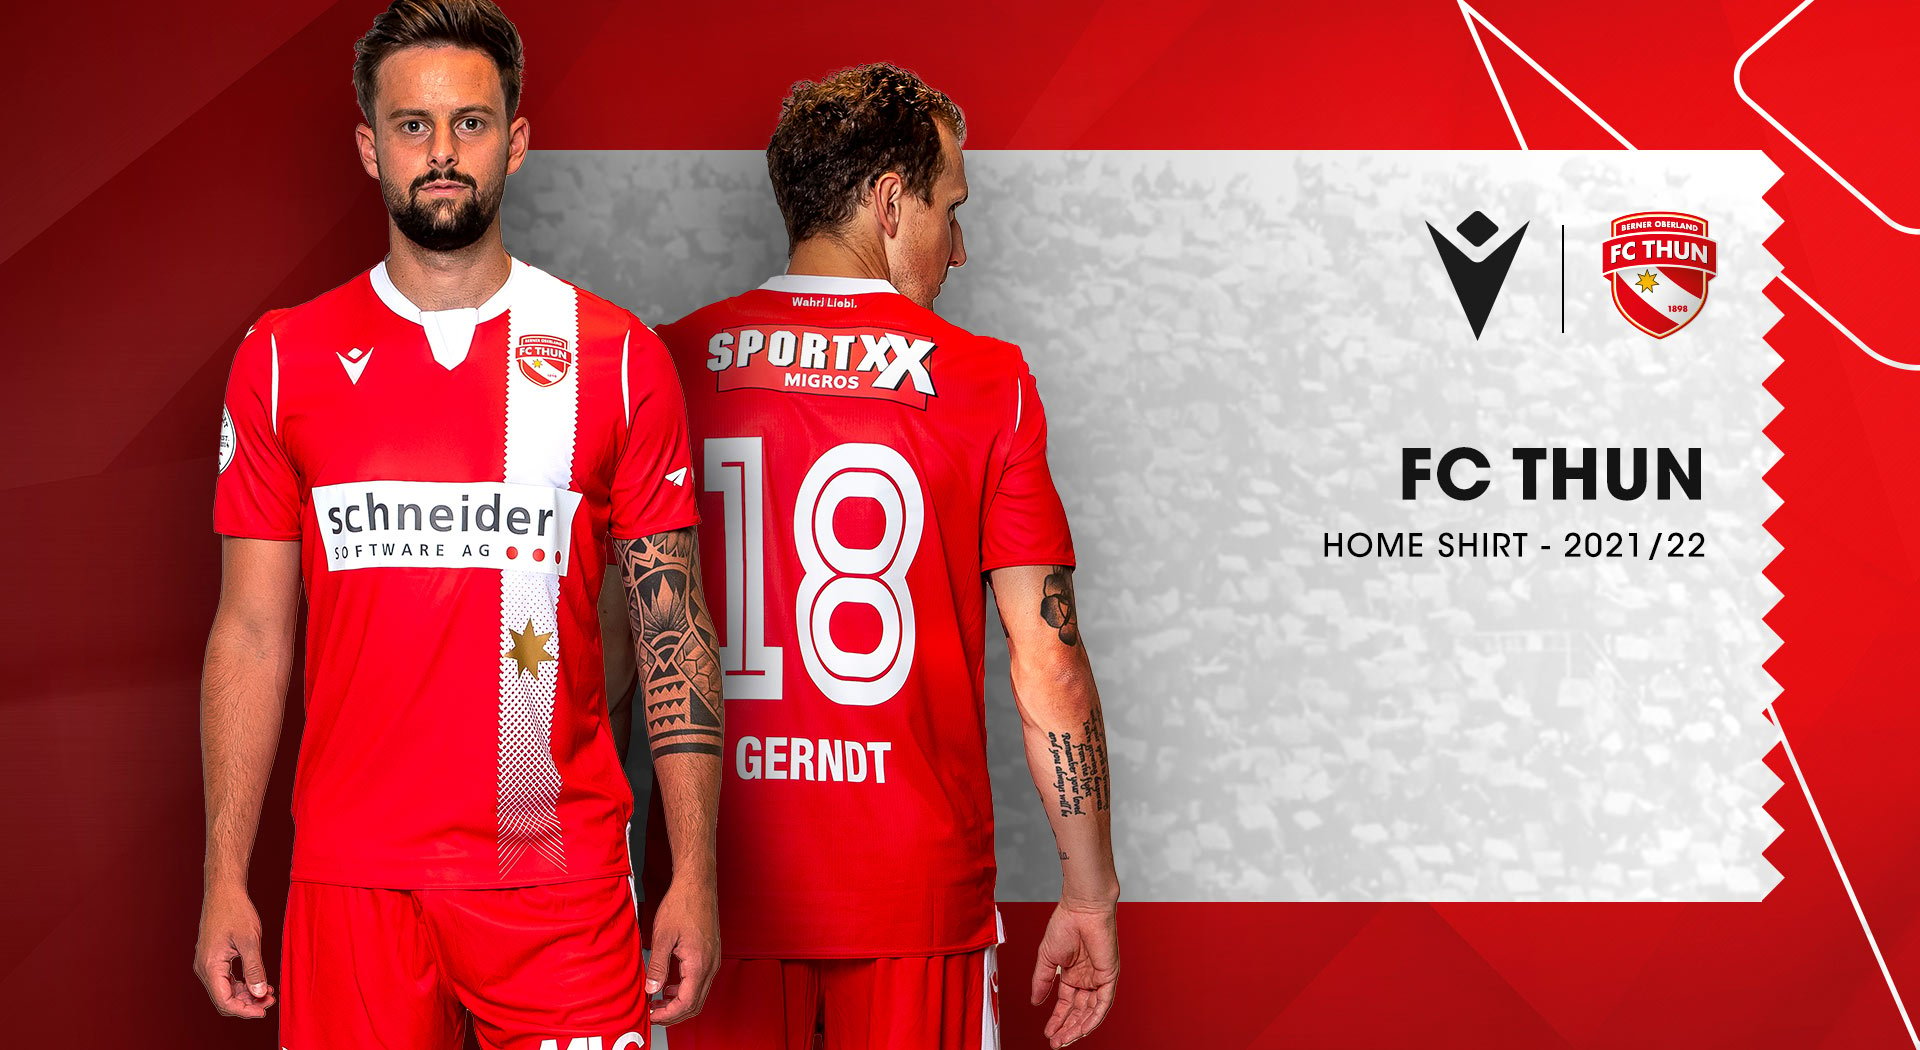 FC THUN AND MACRON UNVEIL NEW JERSEYS FOR THE 2021/22 SEASON